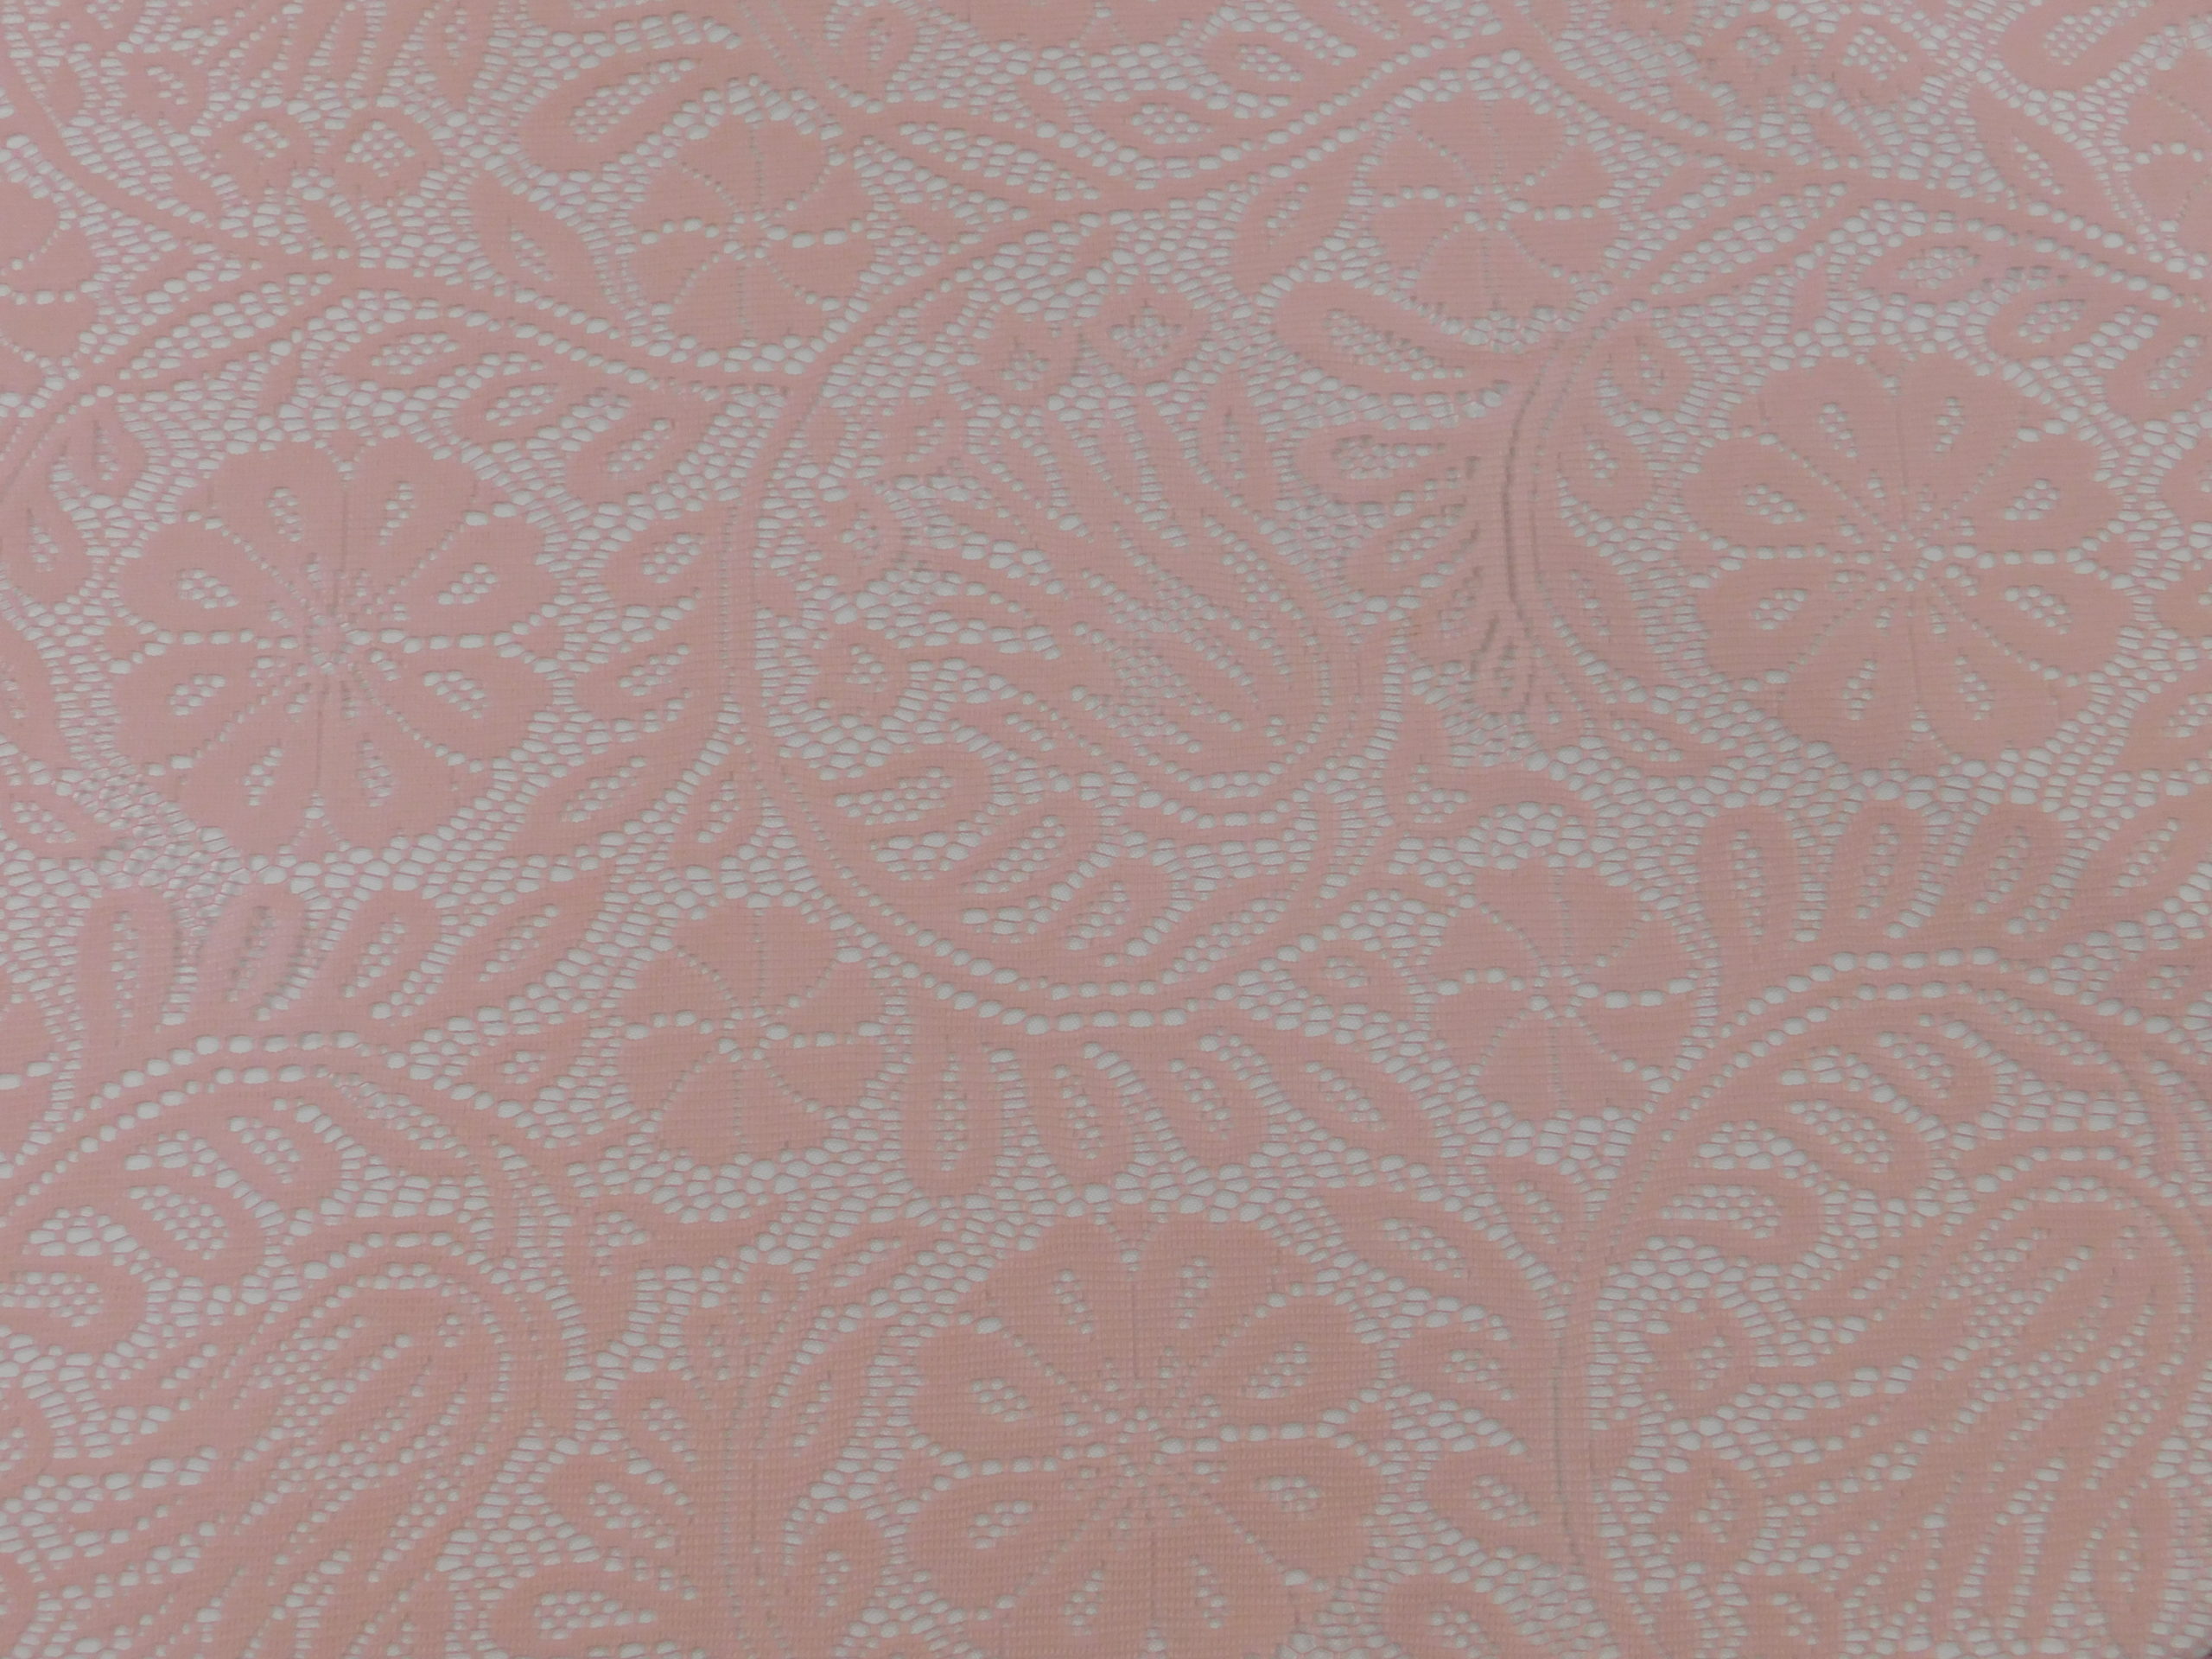 Rose Merletto Lace Runner, 24x120